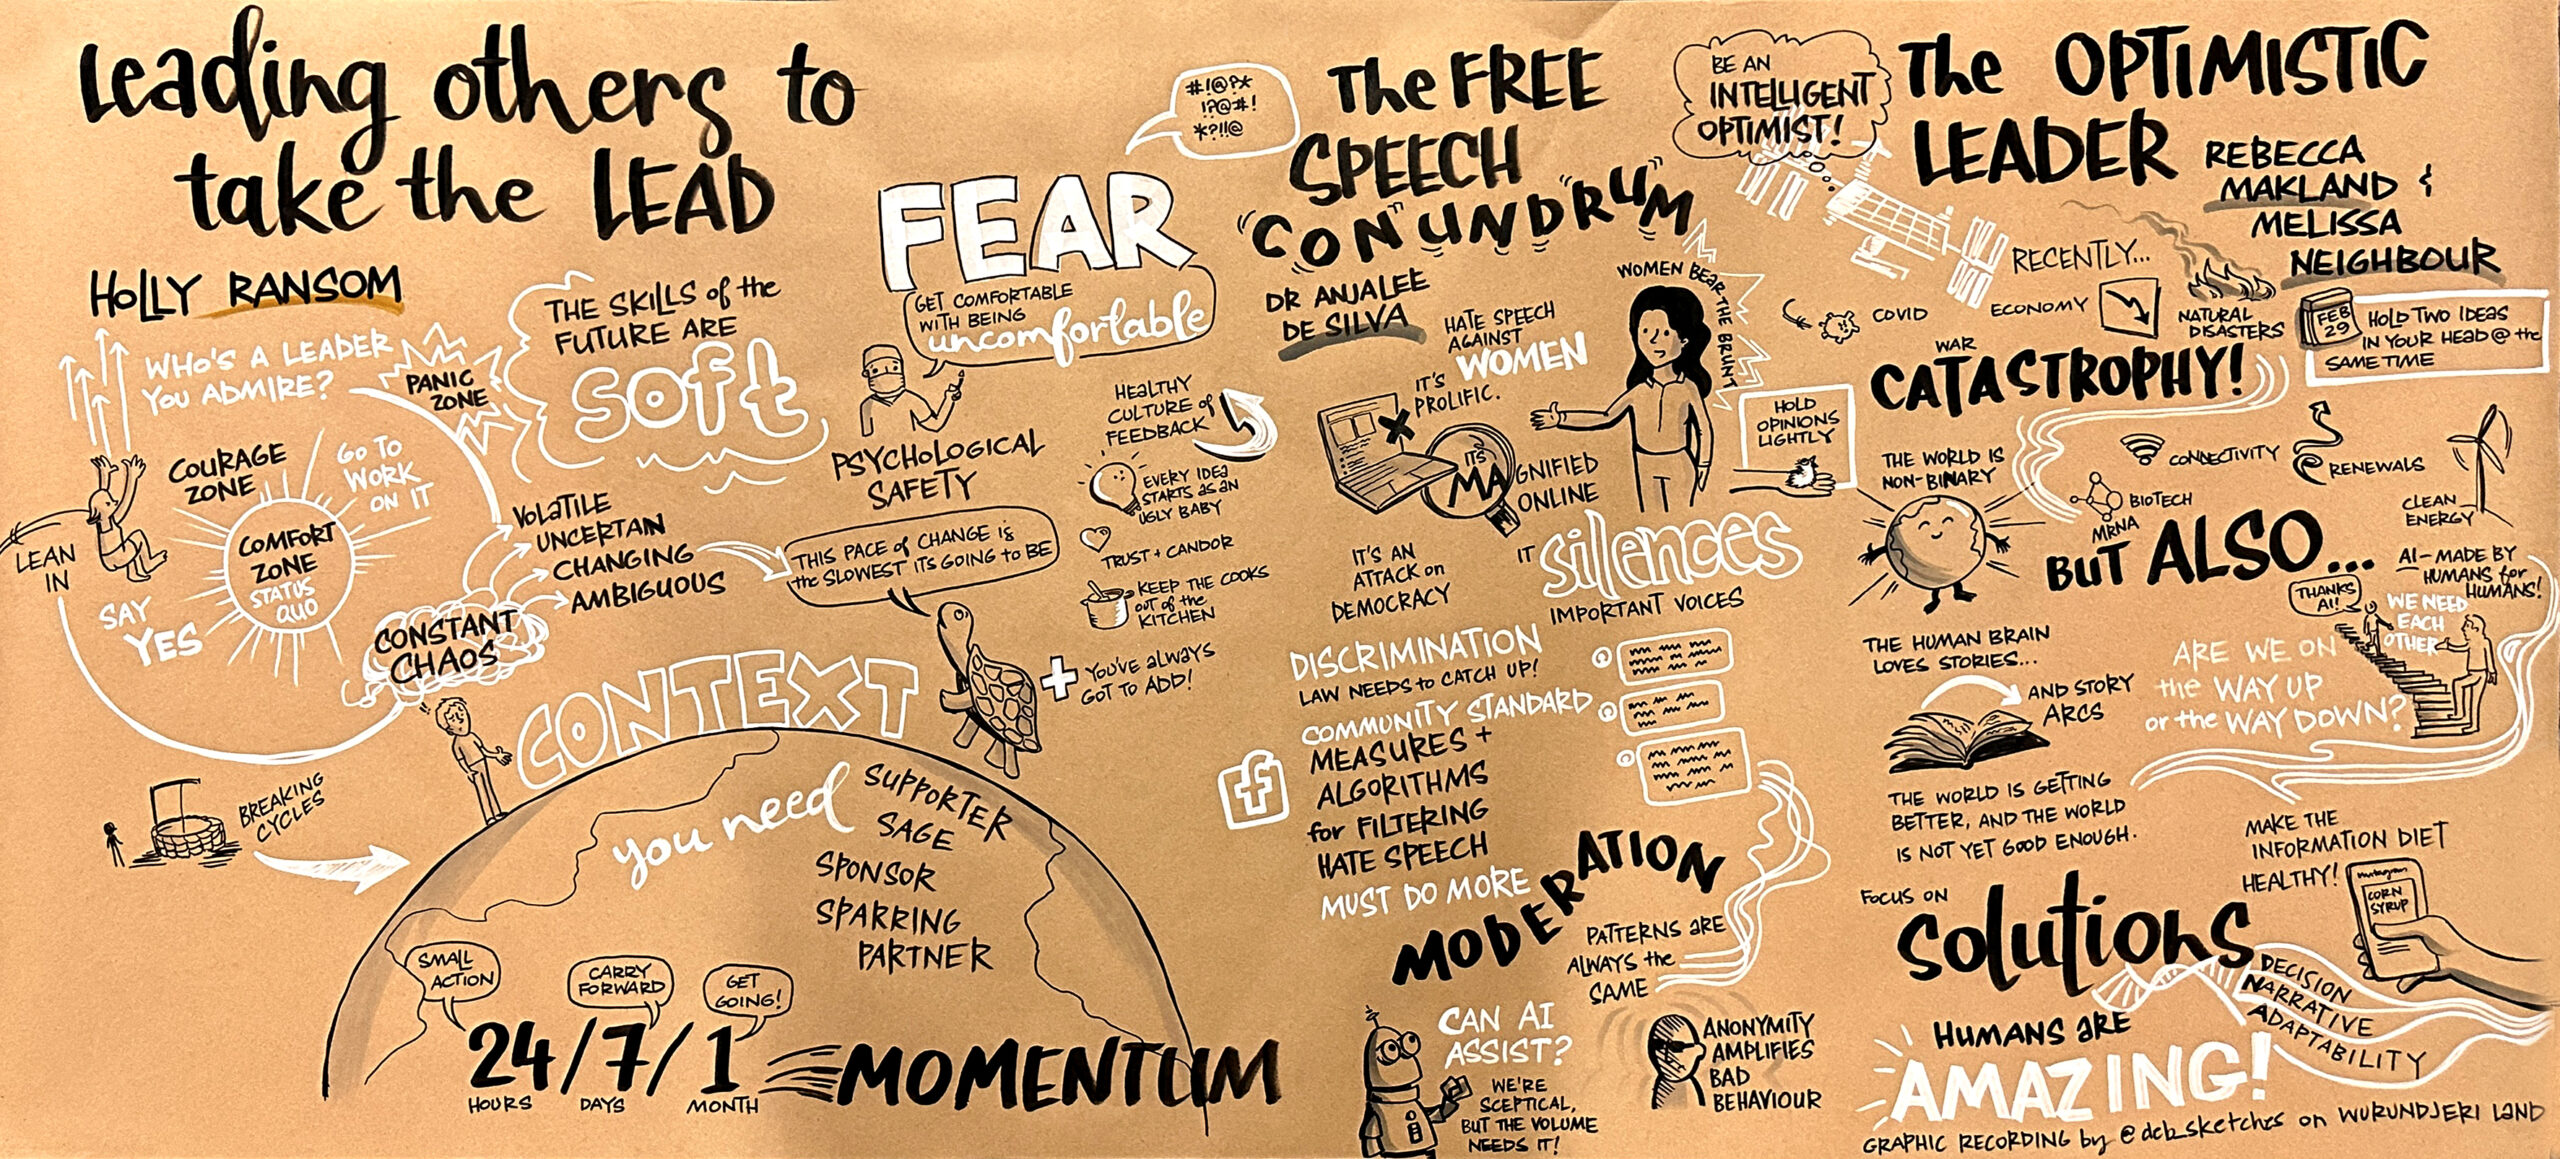 Graphic Recording from Communities in Control 2023